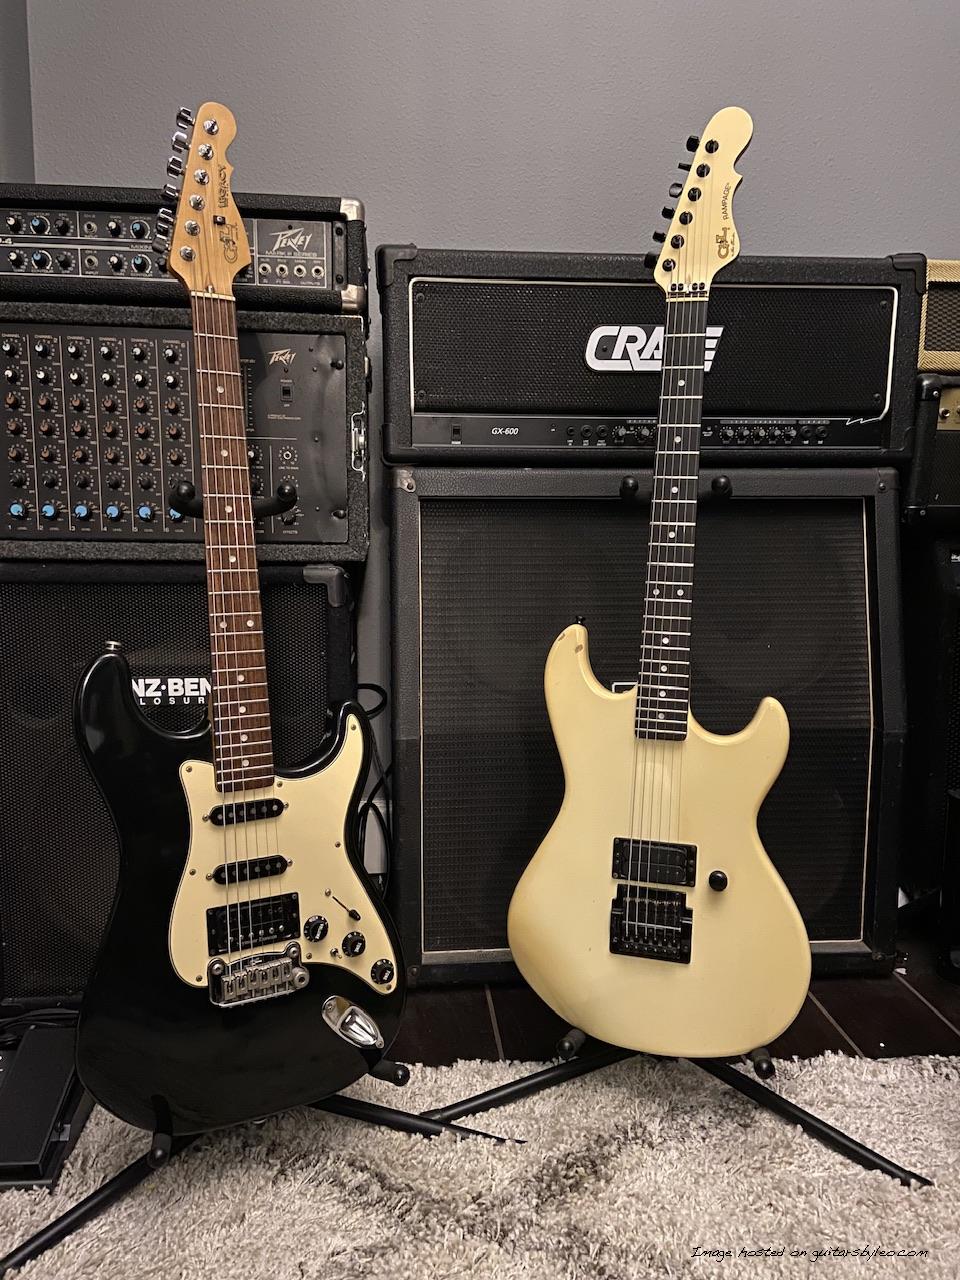 ‘92 G&L Legacy and ‘86/87 G&L Rampage